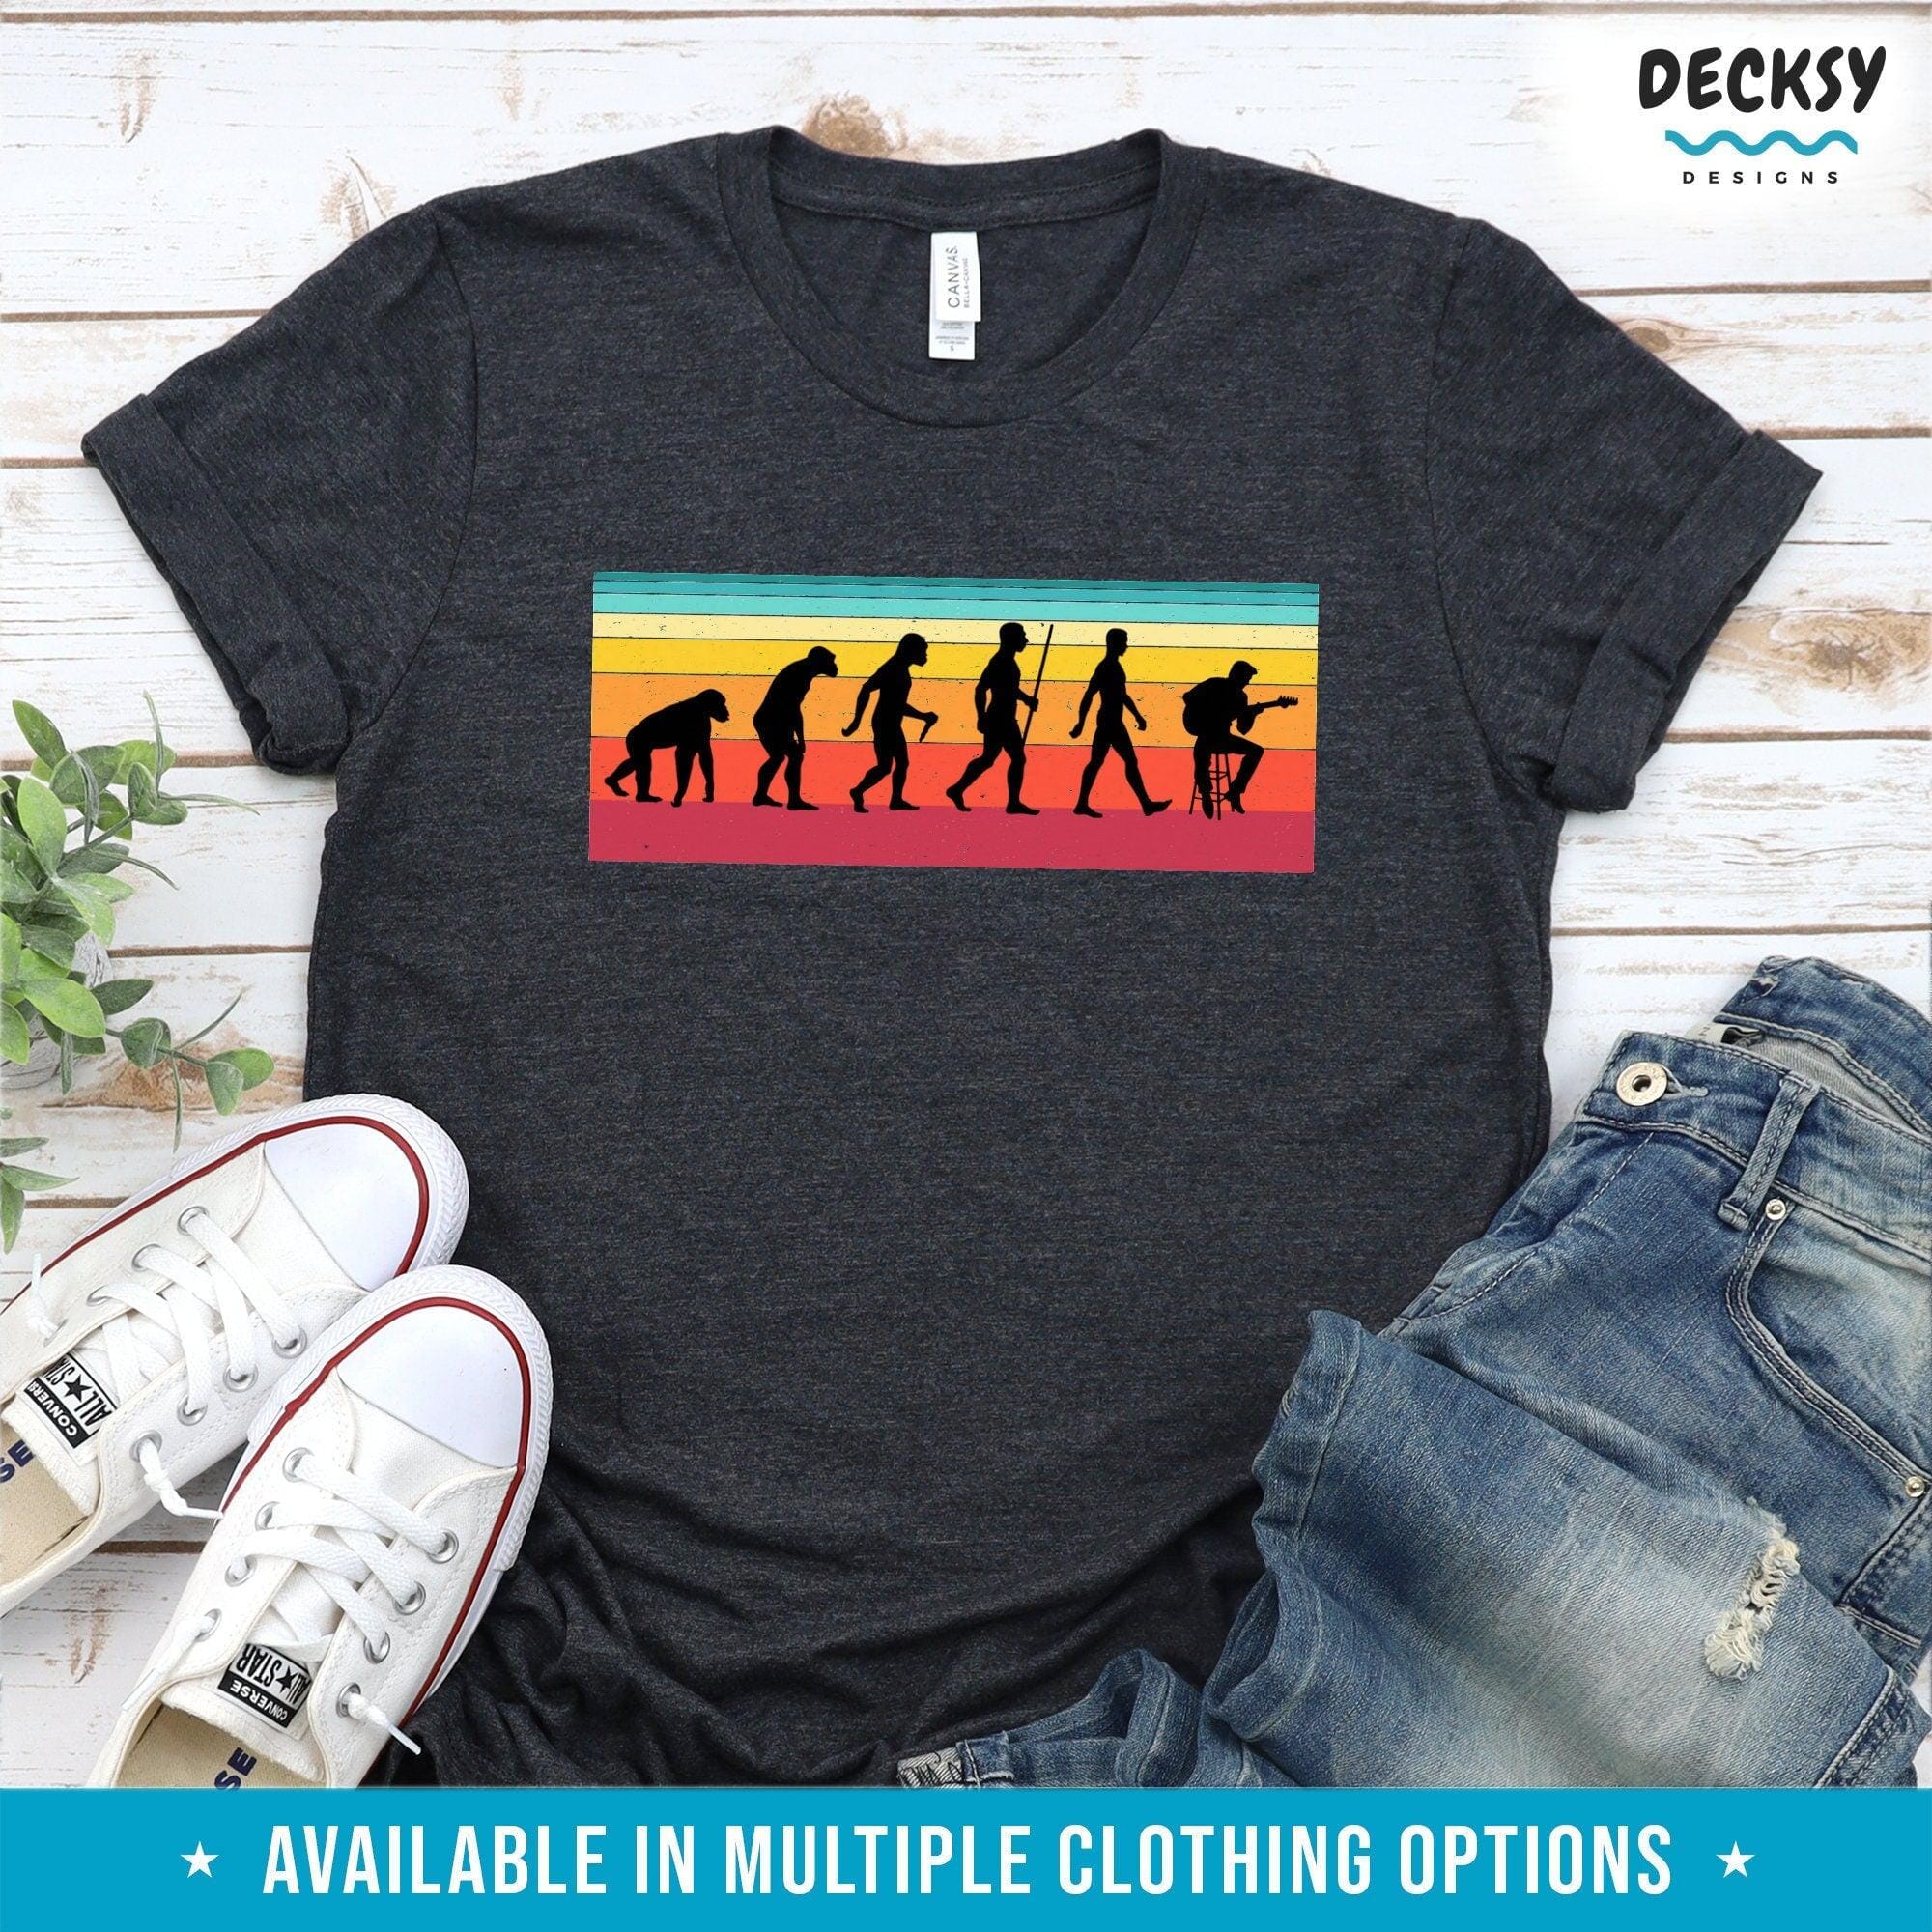 Guitar Shirt For Men, Guitarist Gifts-Clothing:Gender-Neutral Adult Clothing:Tops & Tees:T-shirts:Graphic Tees-DecksyDesigns